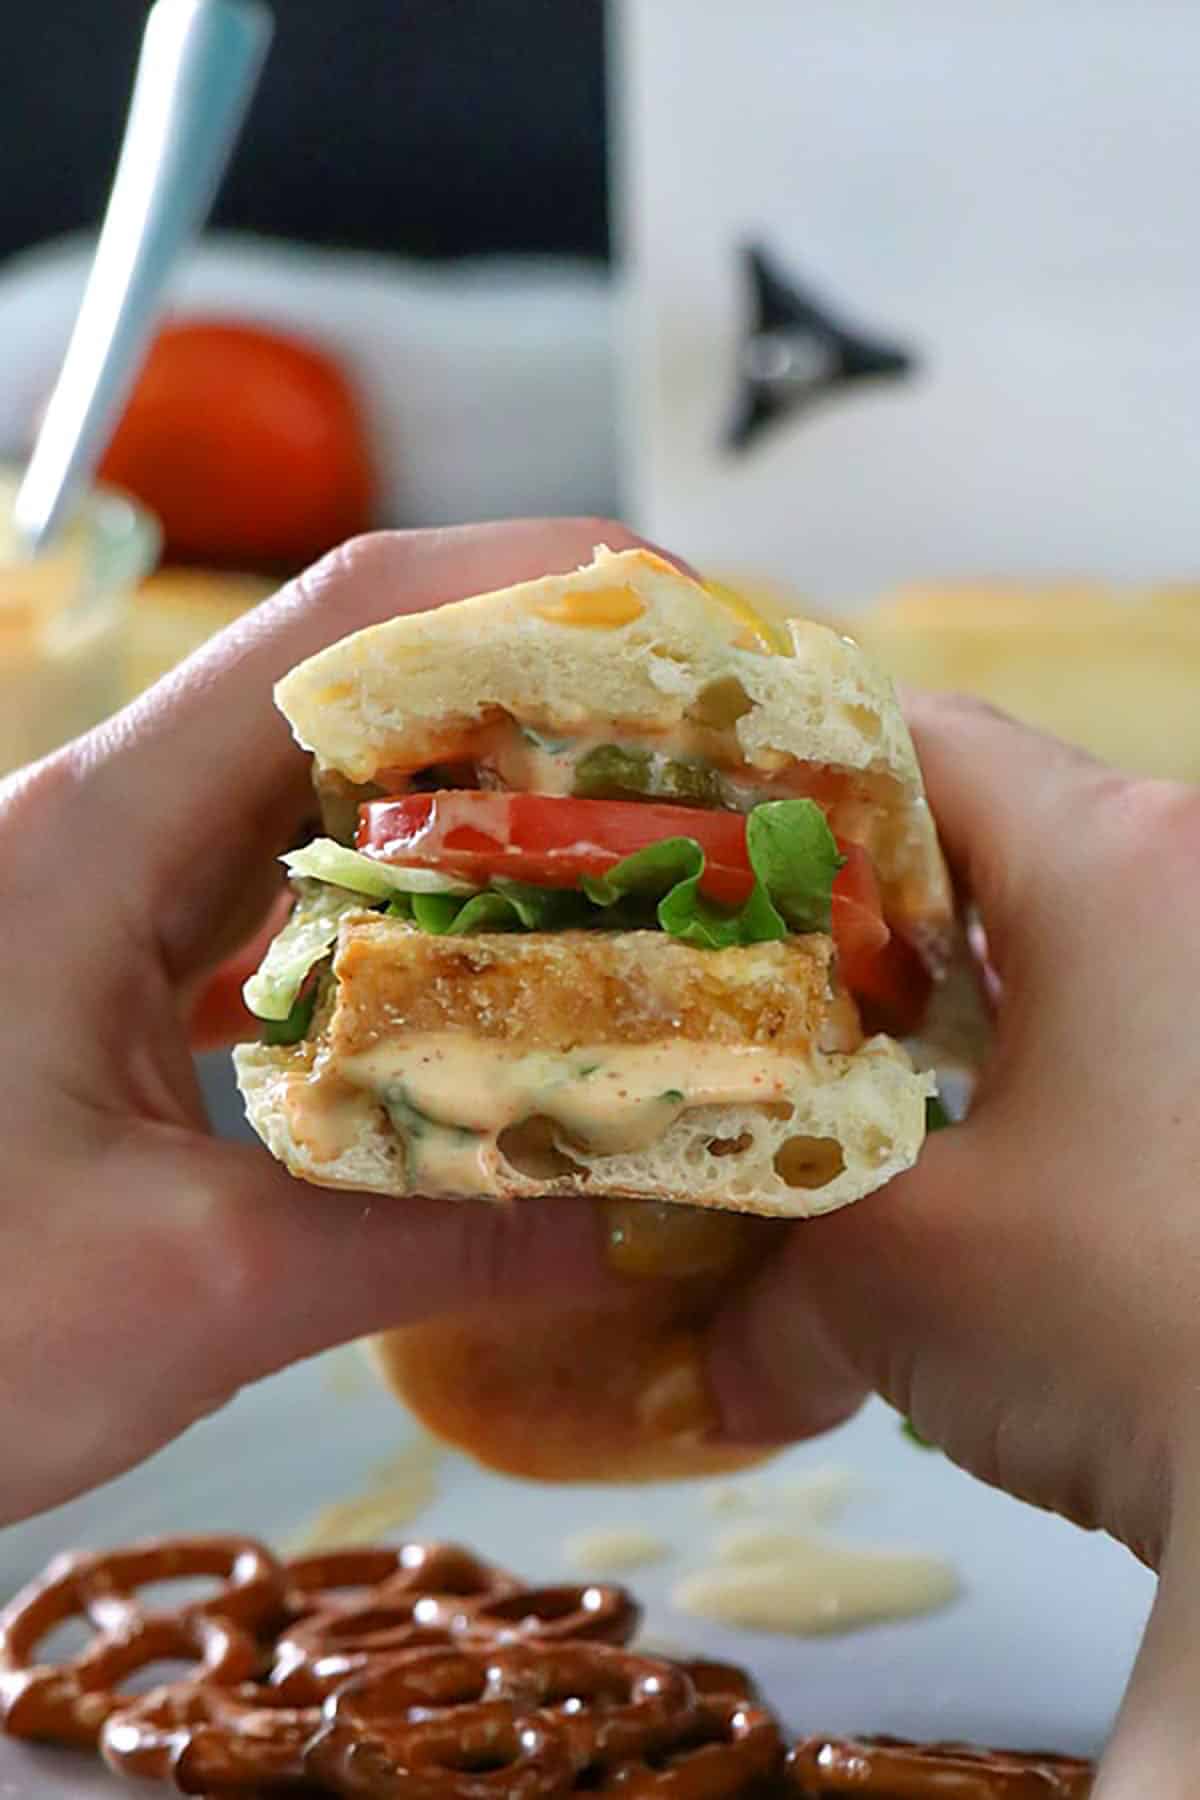 A close up of hands holding baked vegan po' boy with lettuce, tomato, and pickles